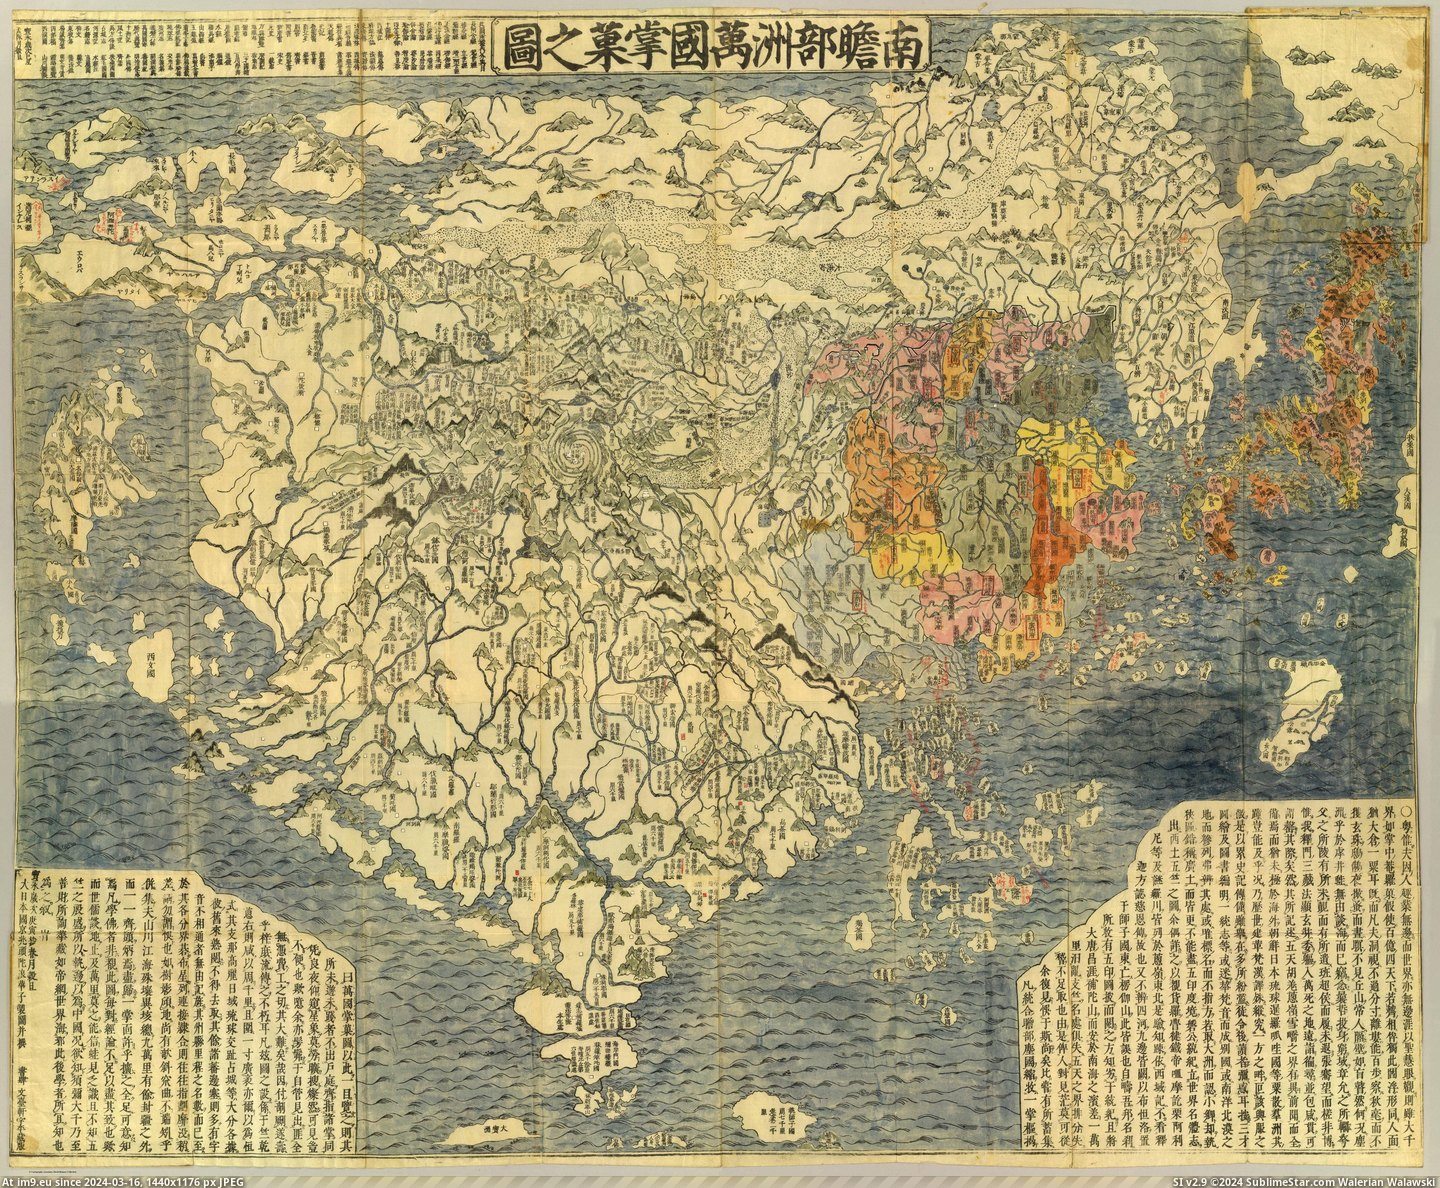 #World #Map #Japan #Prototype #Japa #Subsequent #Maps #Printed #Buddhist [Mapporn] The first Buddhist world map printed in Japan and the prototype for all subsequent Buddhist world maps printed in Japa Pic. (Image of album My r/MAPS favs))